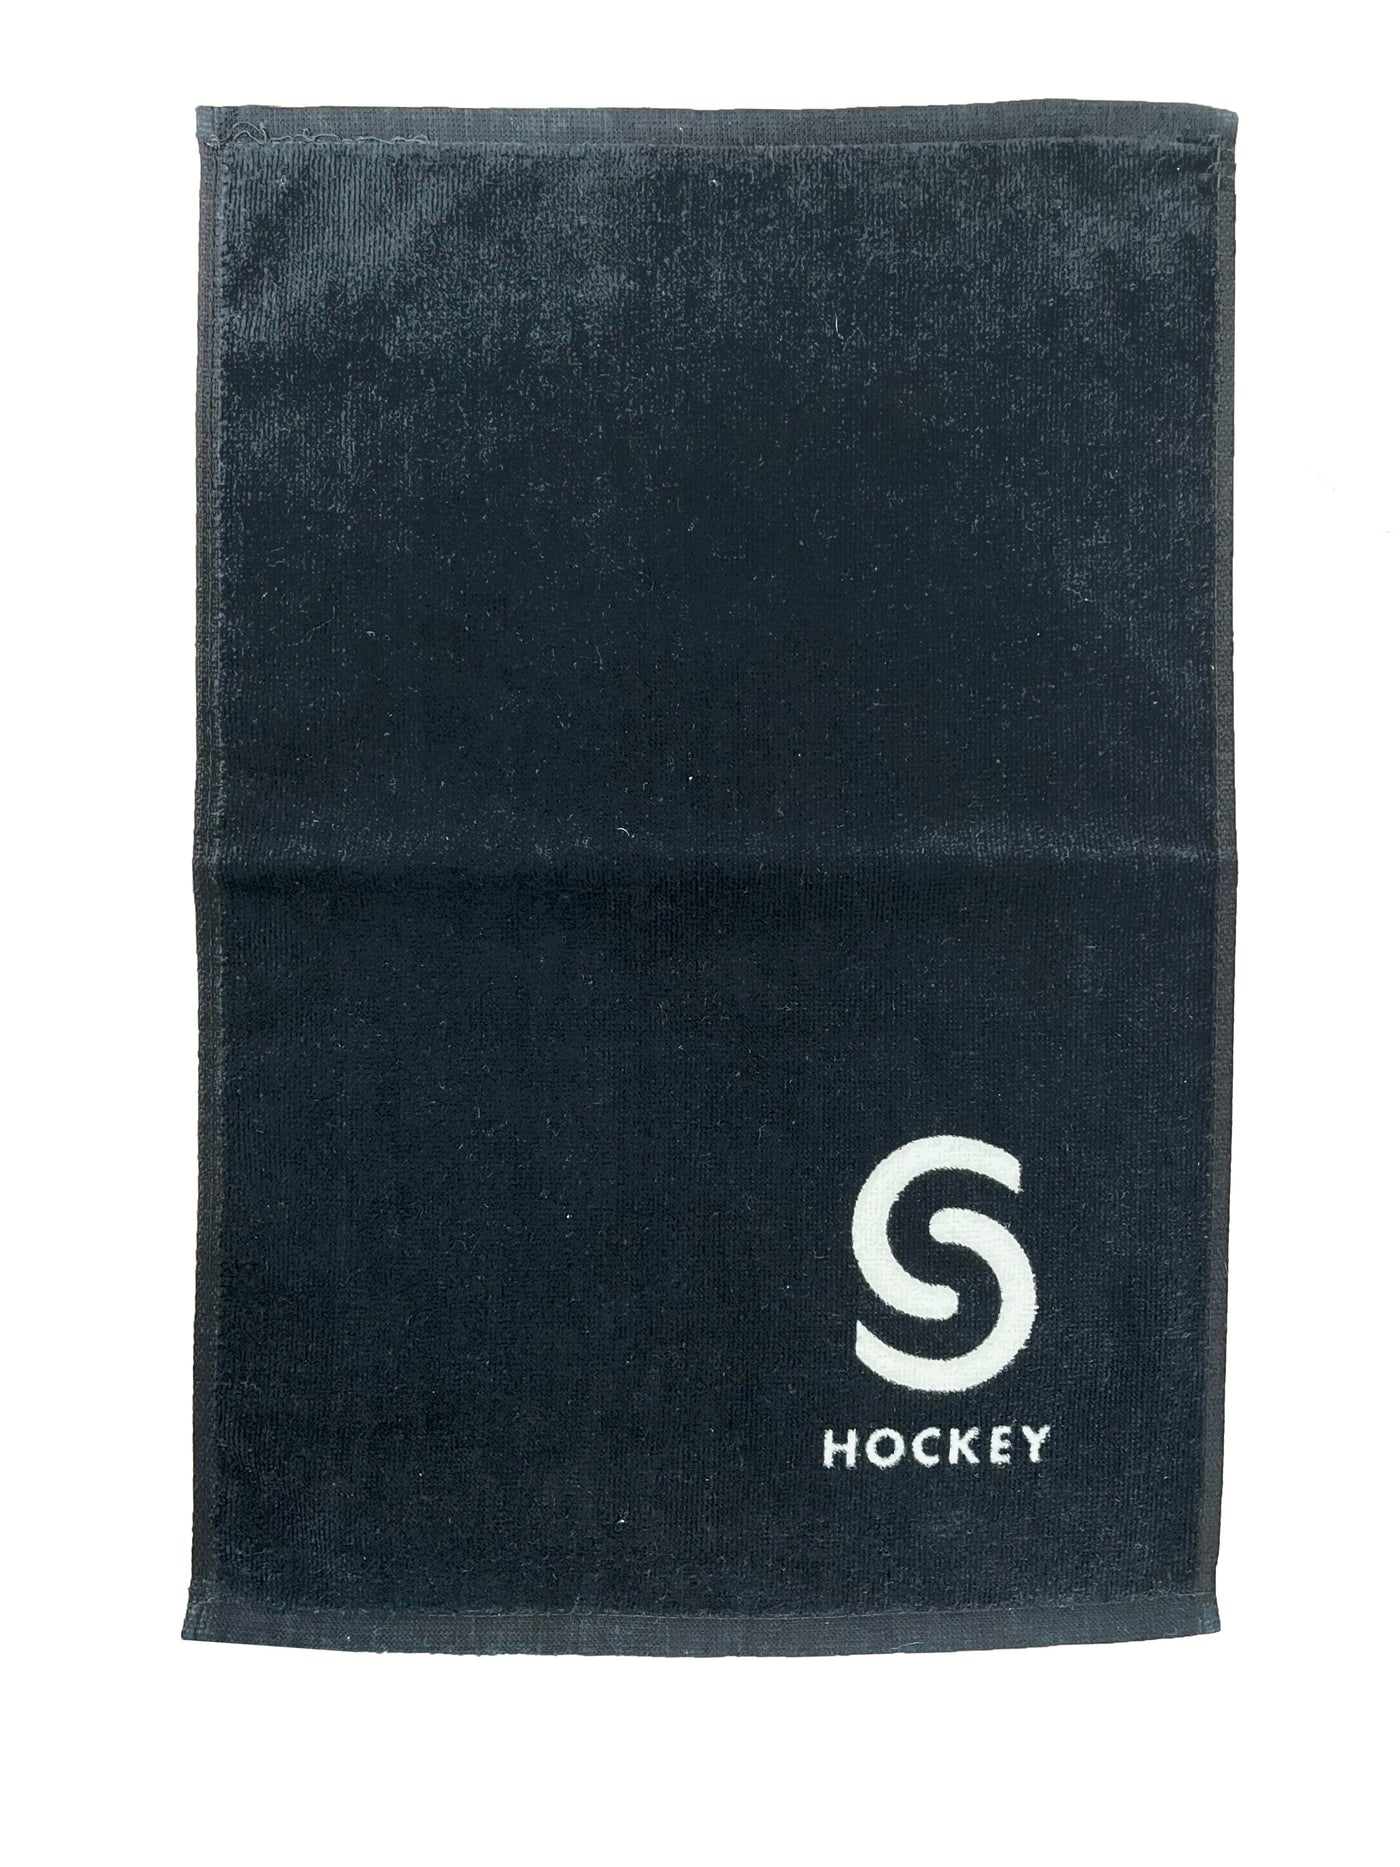 Source for Sports Skate Towel - The Hockey Shop Source For Sports